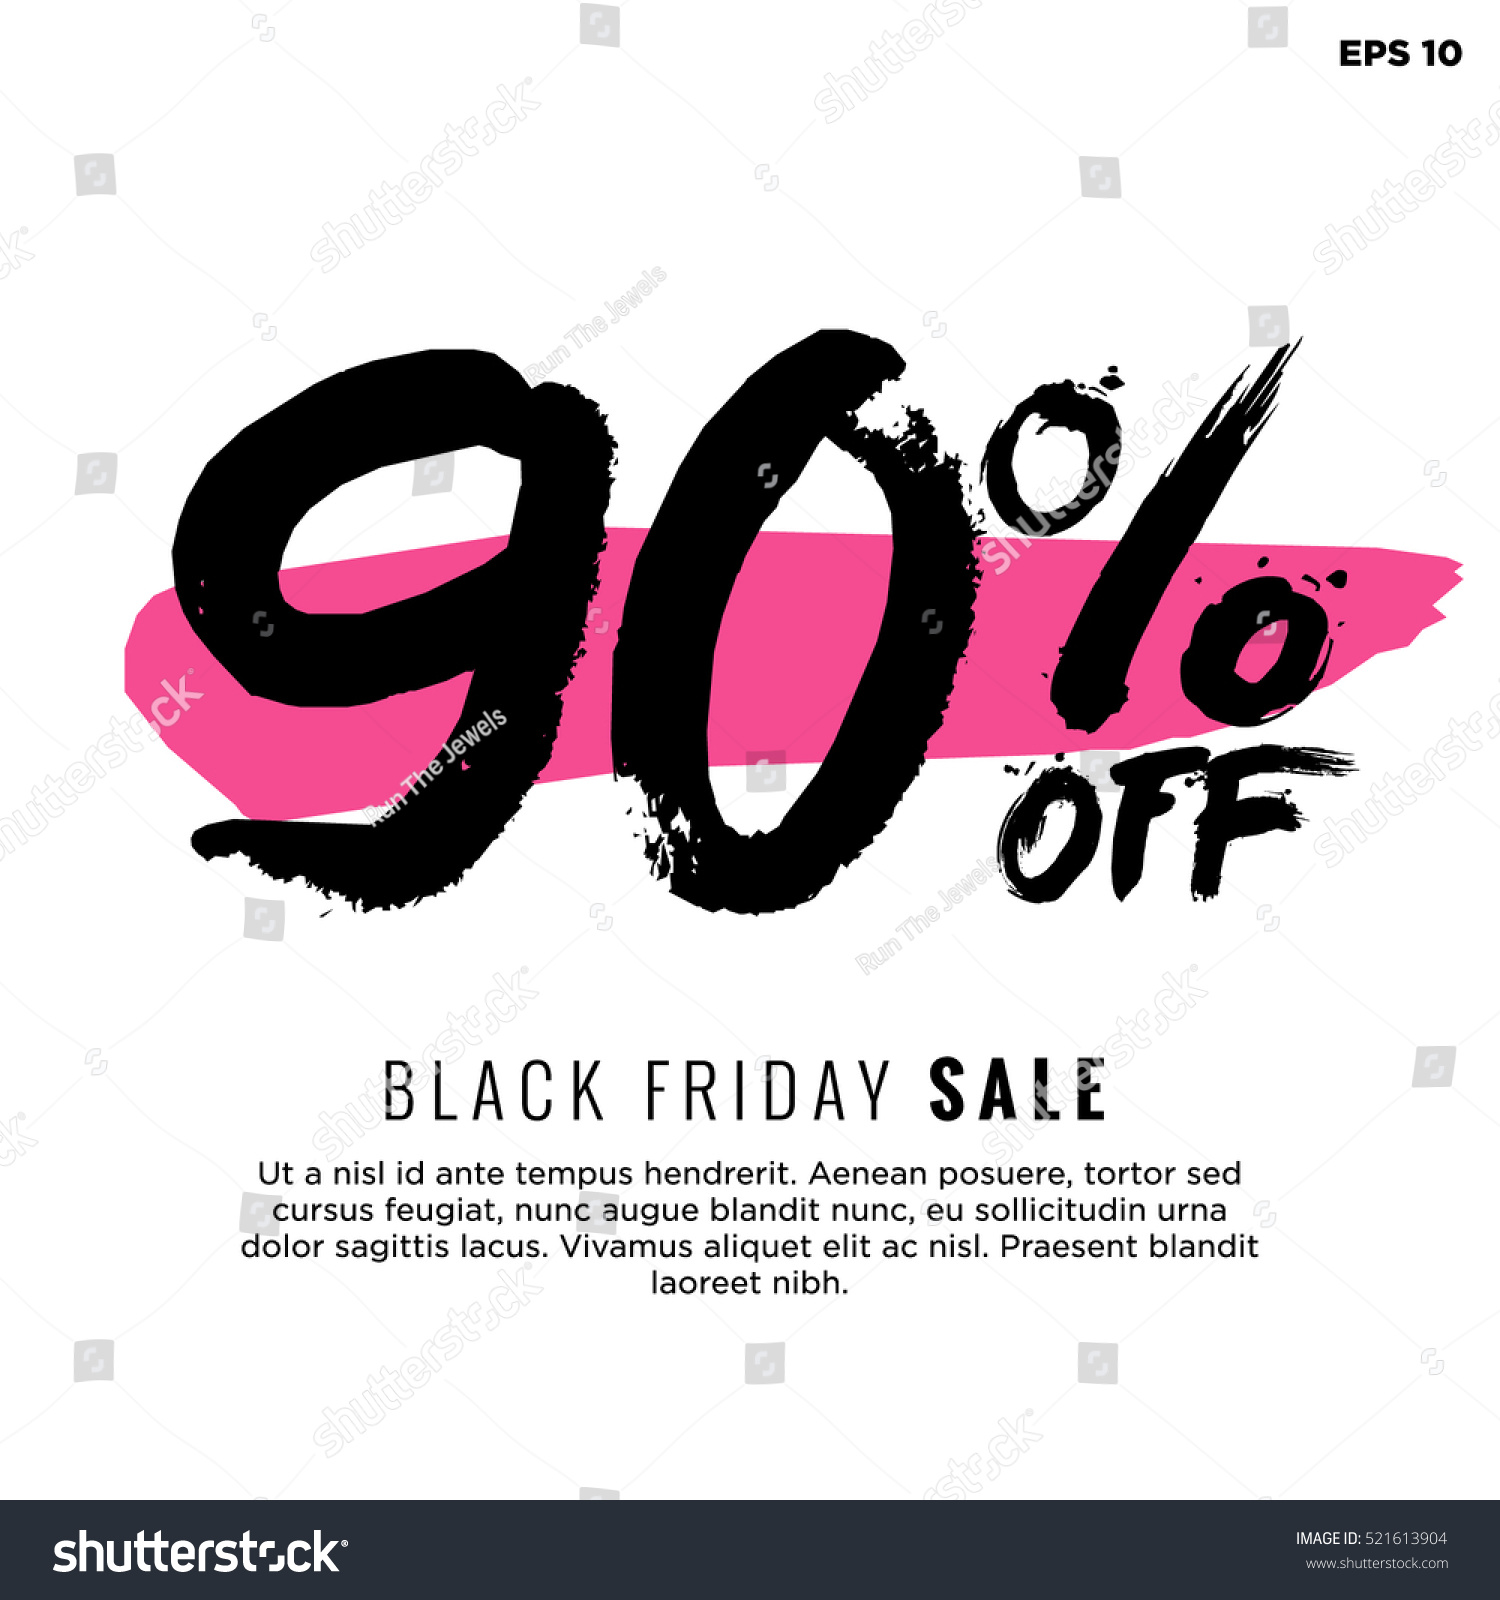 90 Off Black Friday Sale Promotional Stock Vector Royalty Free 521613904